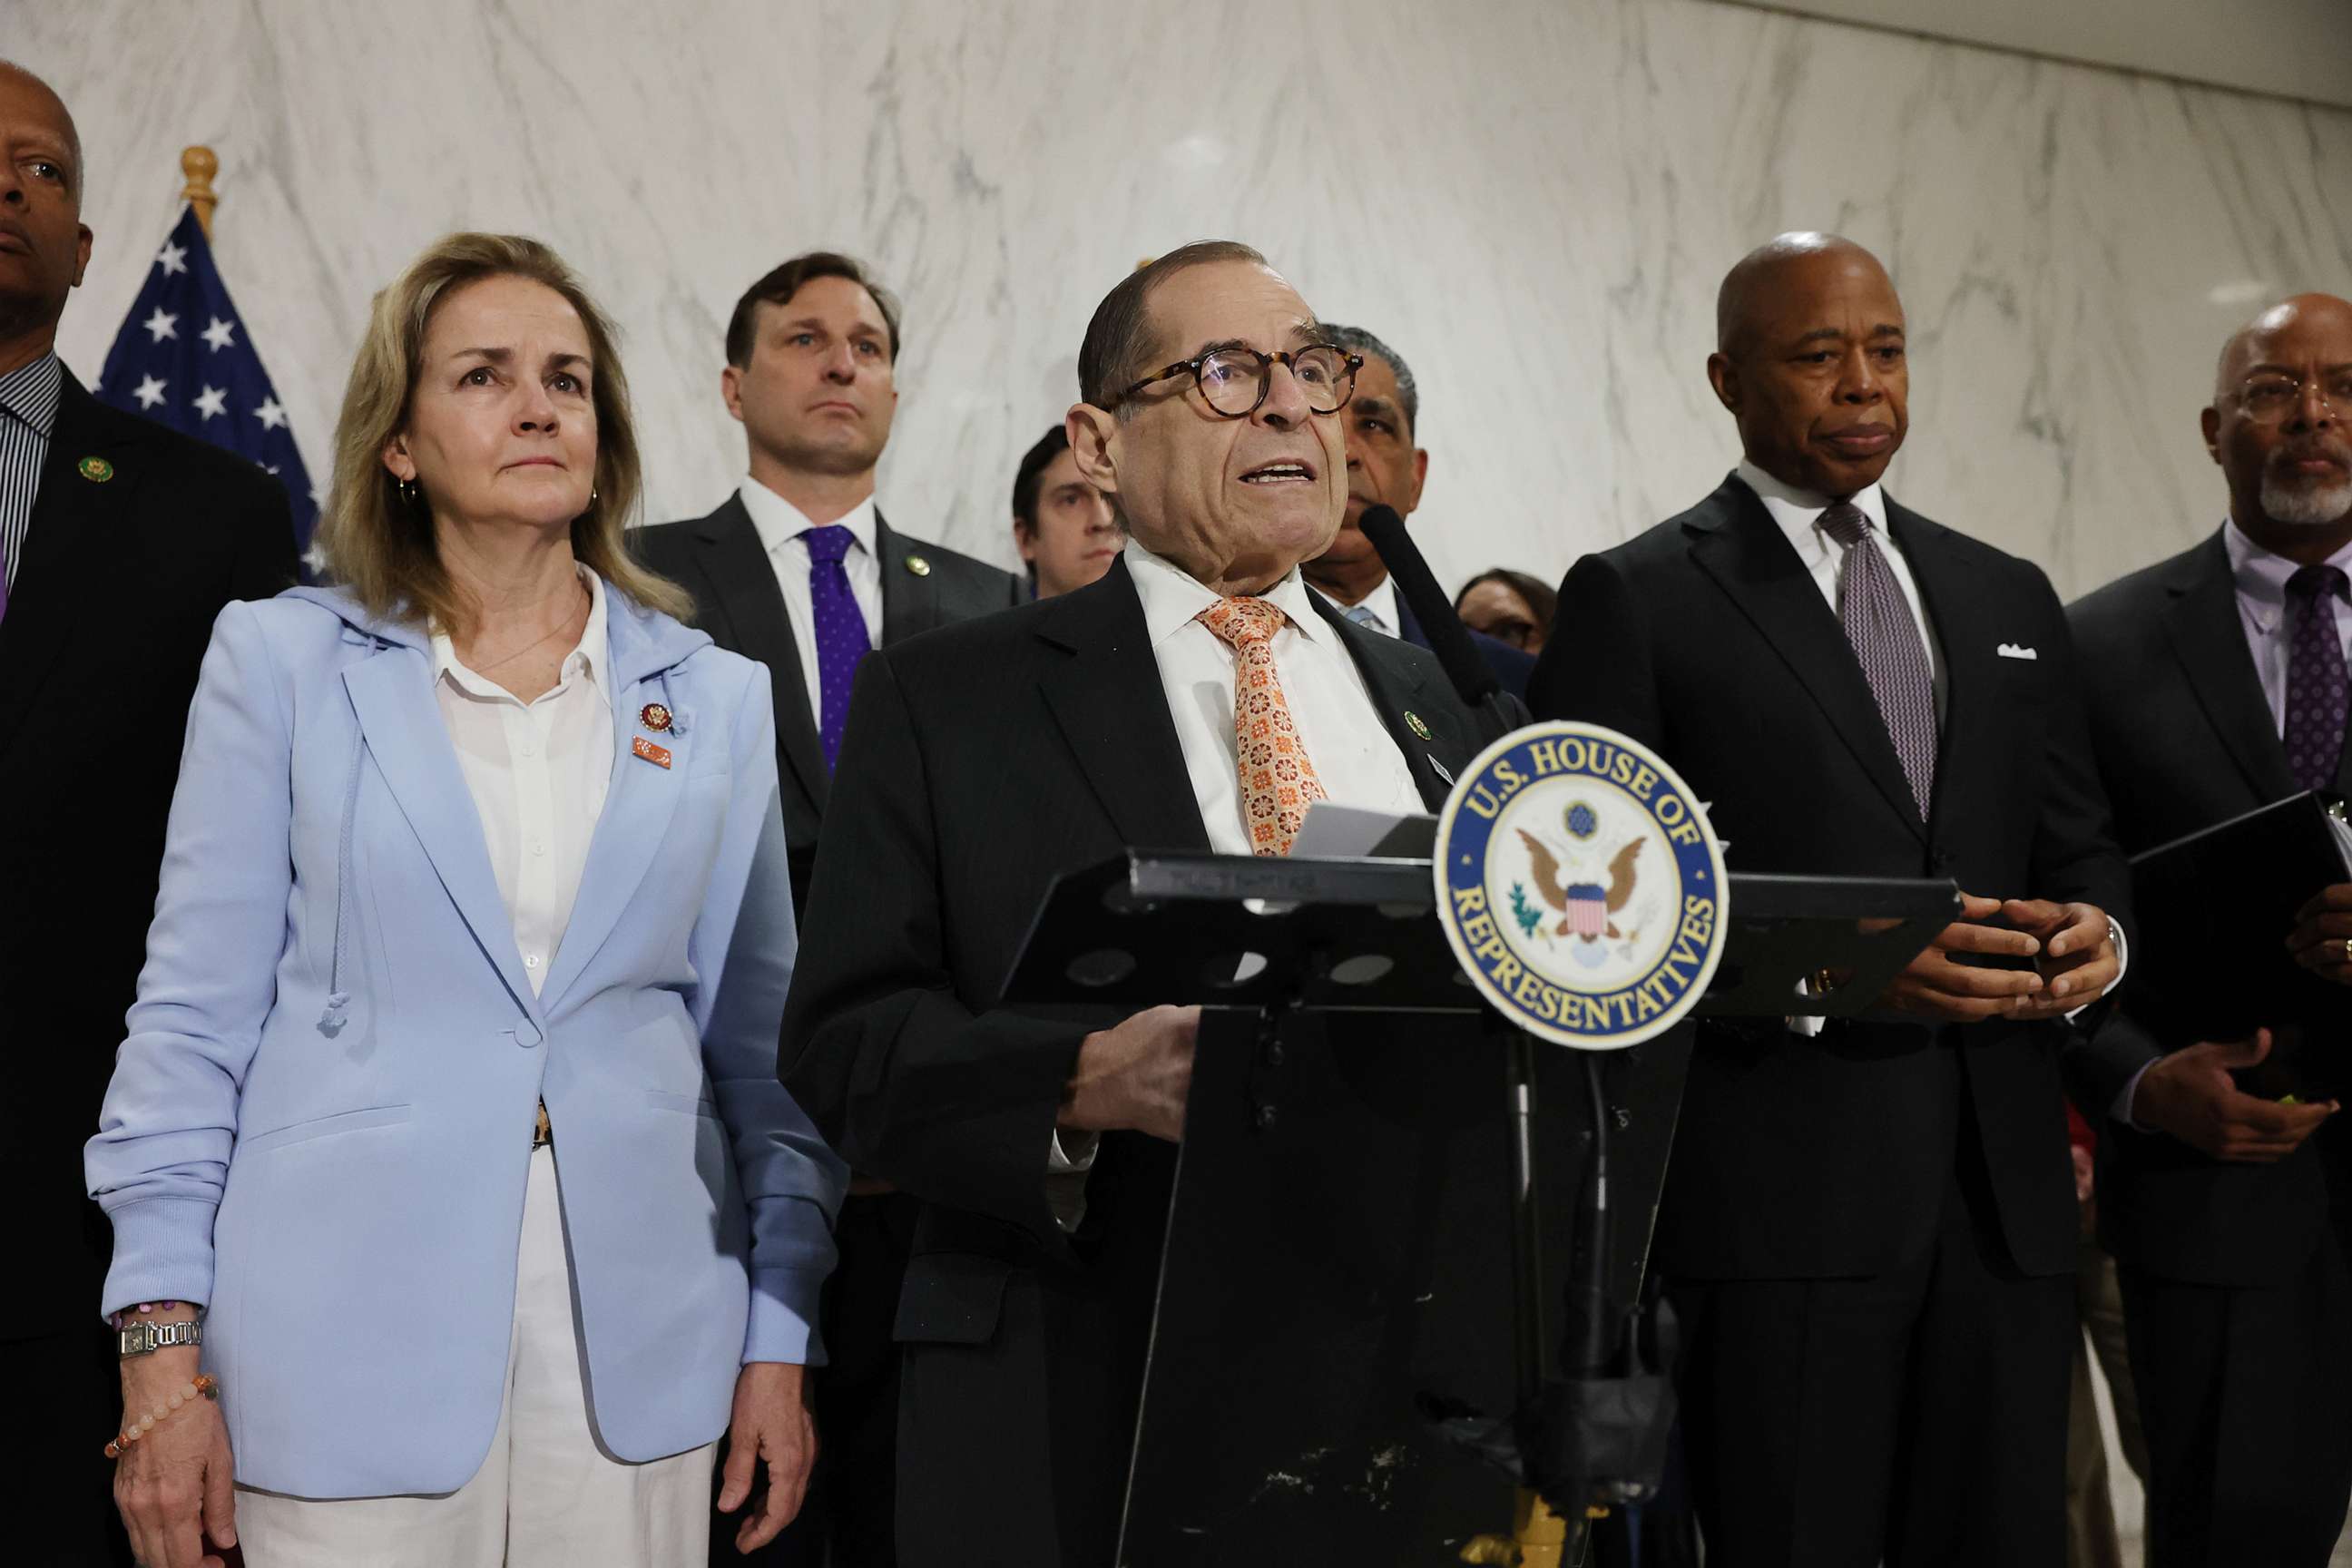 PHOTO: Jerry Nadler joins New York City Mayor Eric Adams and others at a news conference before a House Judiciary Committee field hearing in Manhattan at the Javits Federal Building on violent crime in the city on April 17, 2023 in New York City.